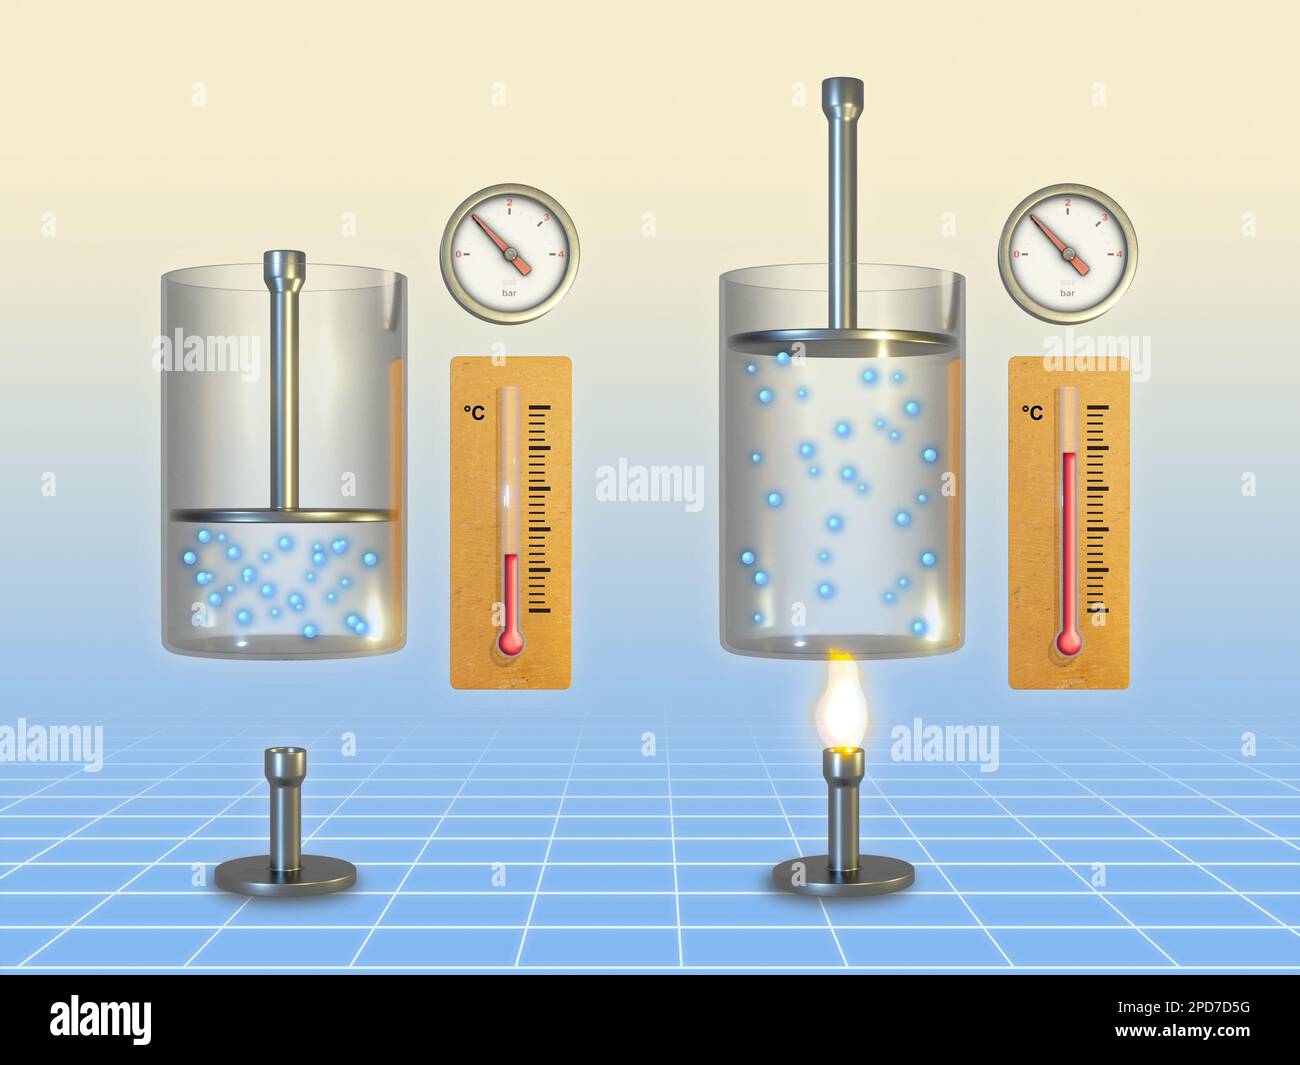 Charles's law: how gas tend to expand when heated. Digital illustration, 3D render. Stock Photo